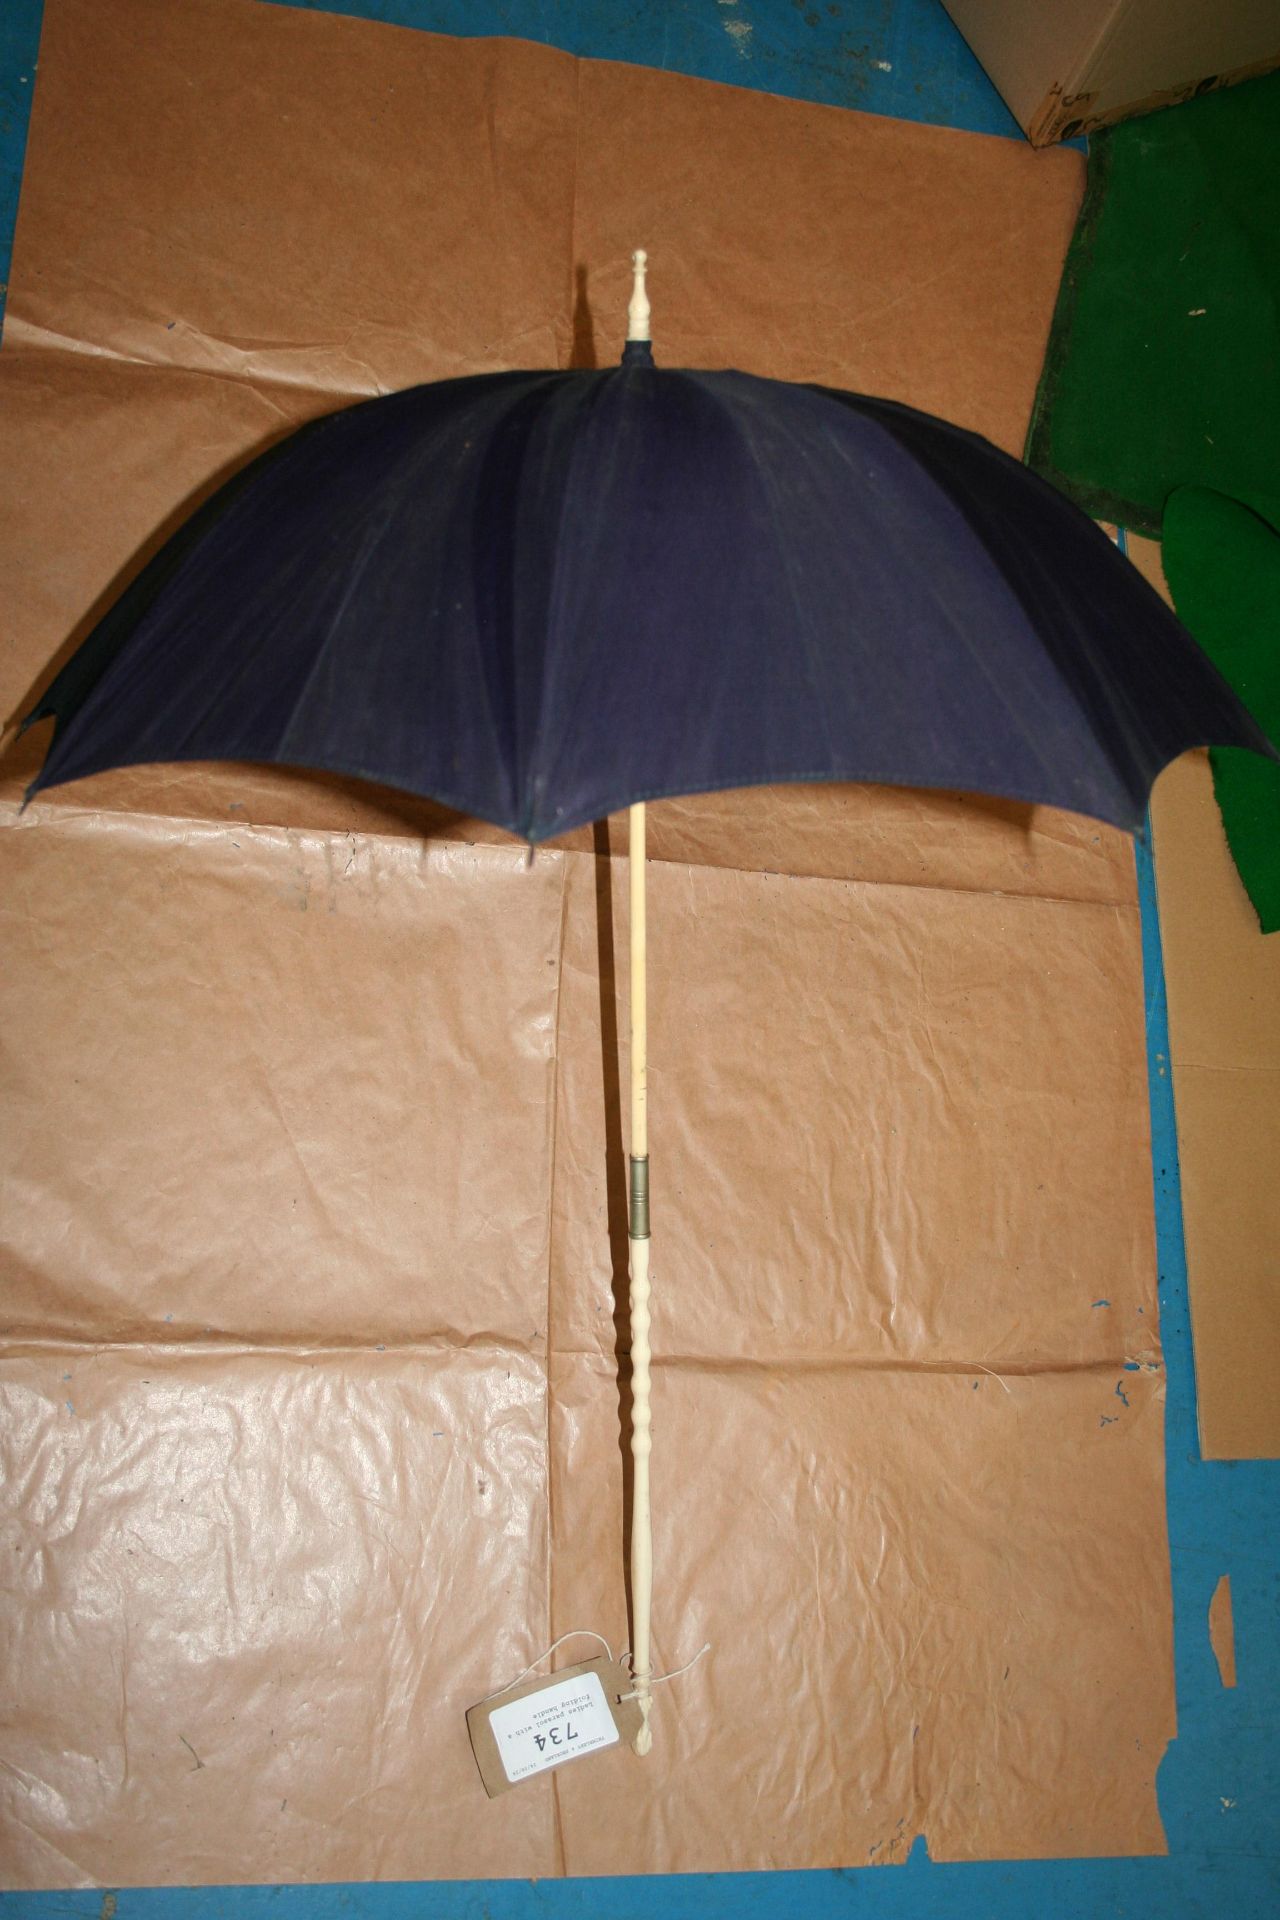 Ladies' parasol with a folding handle